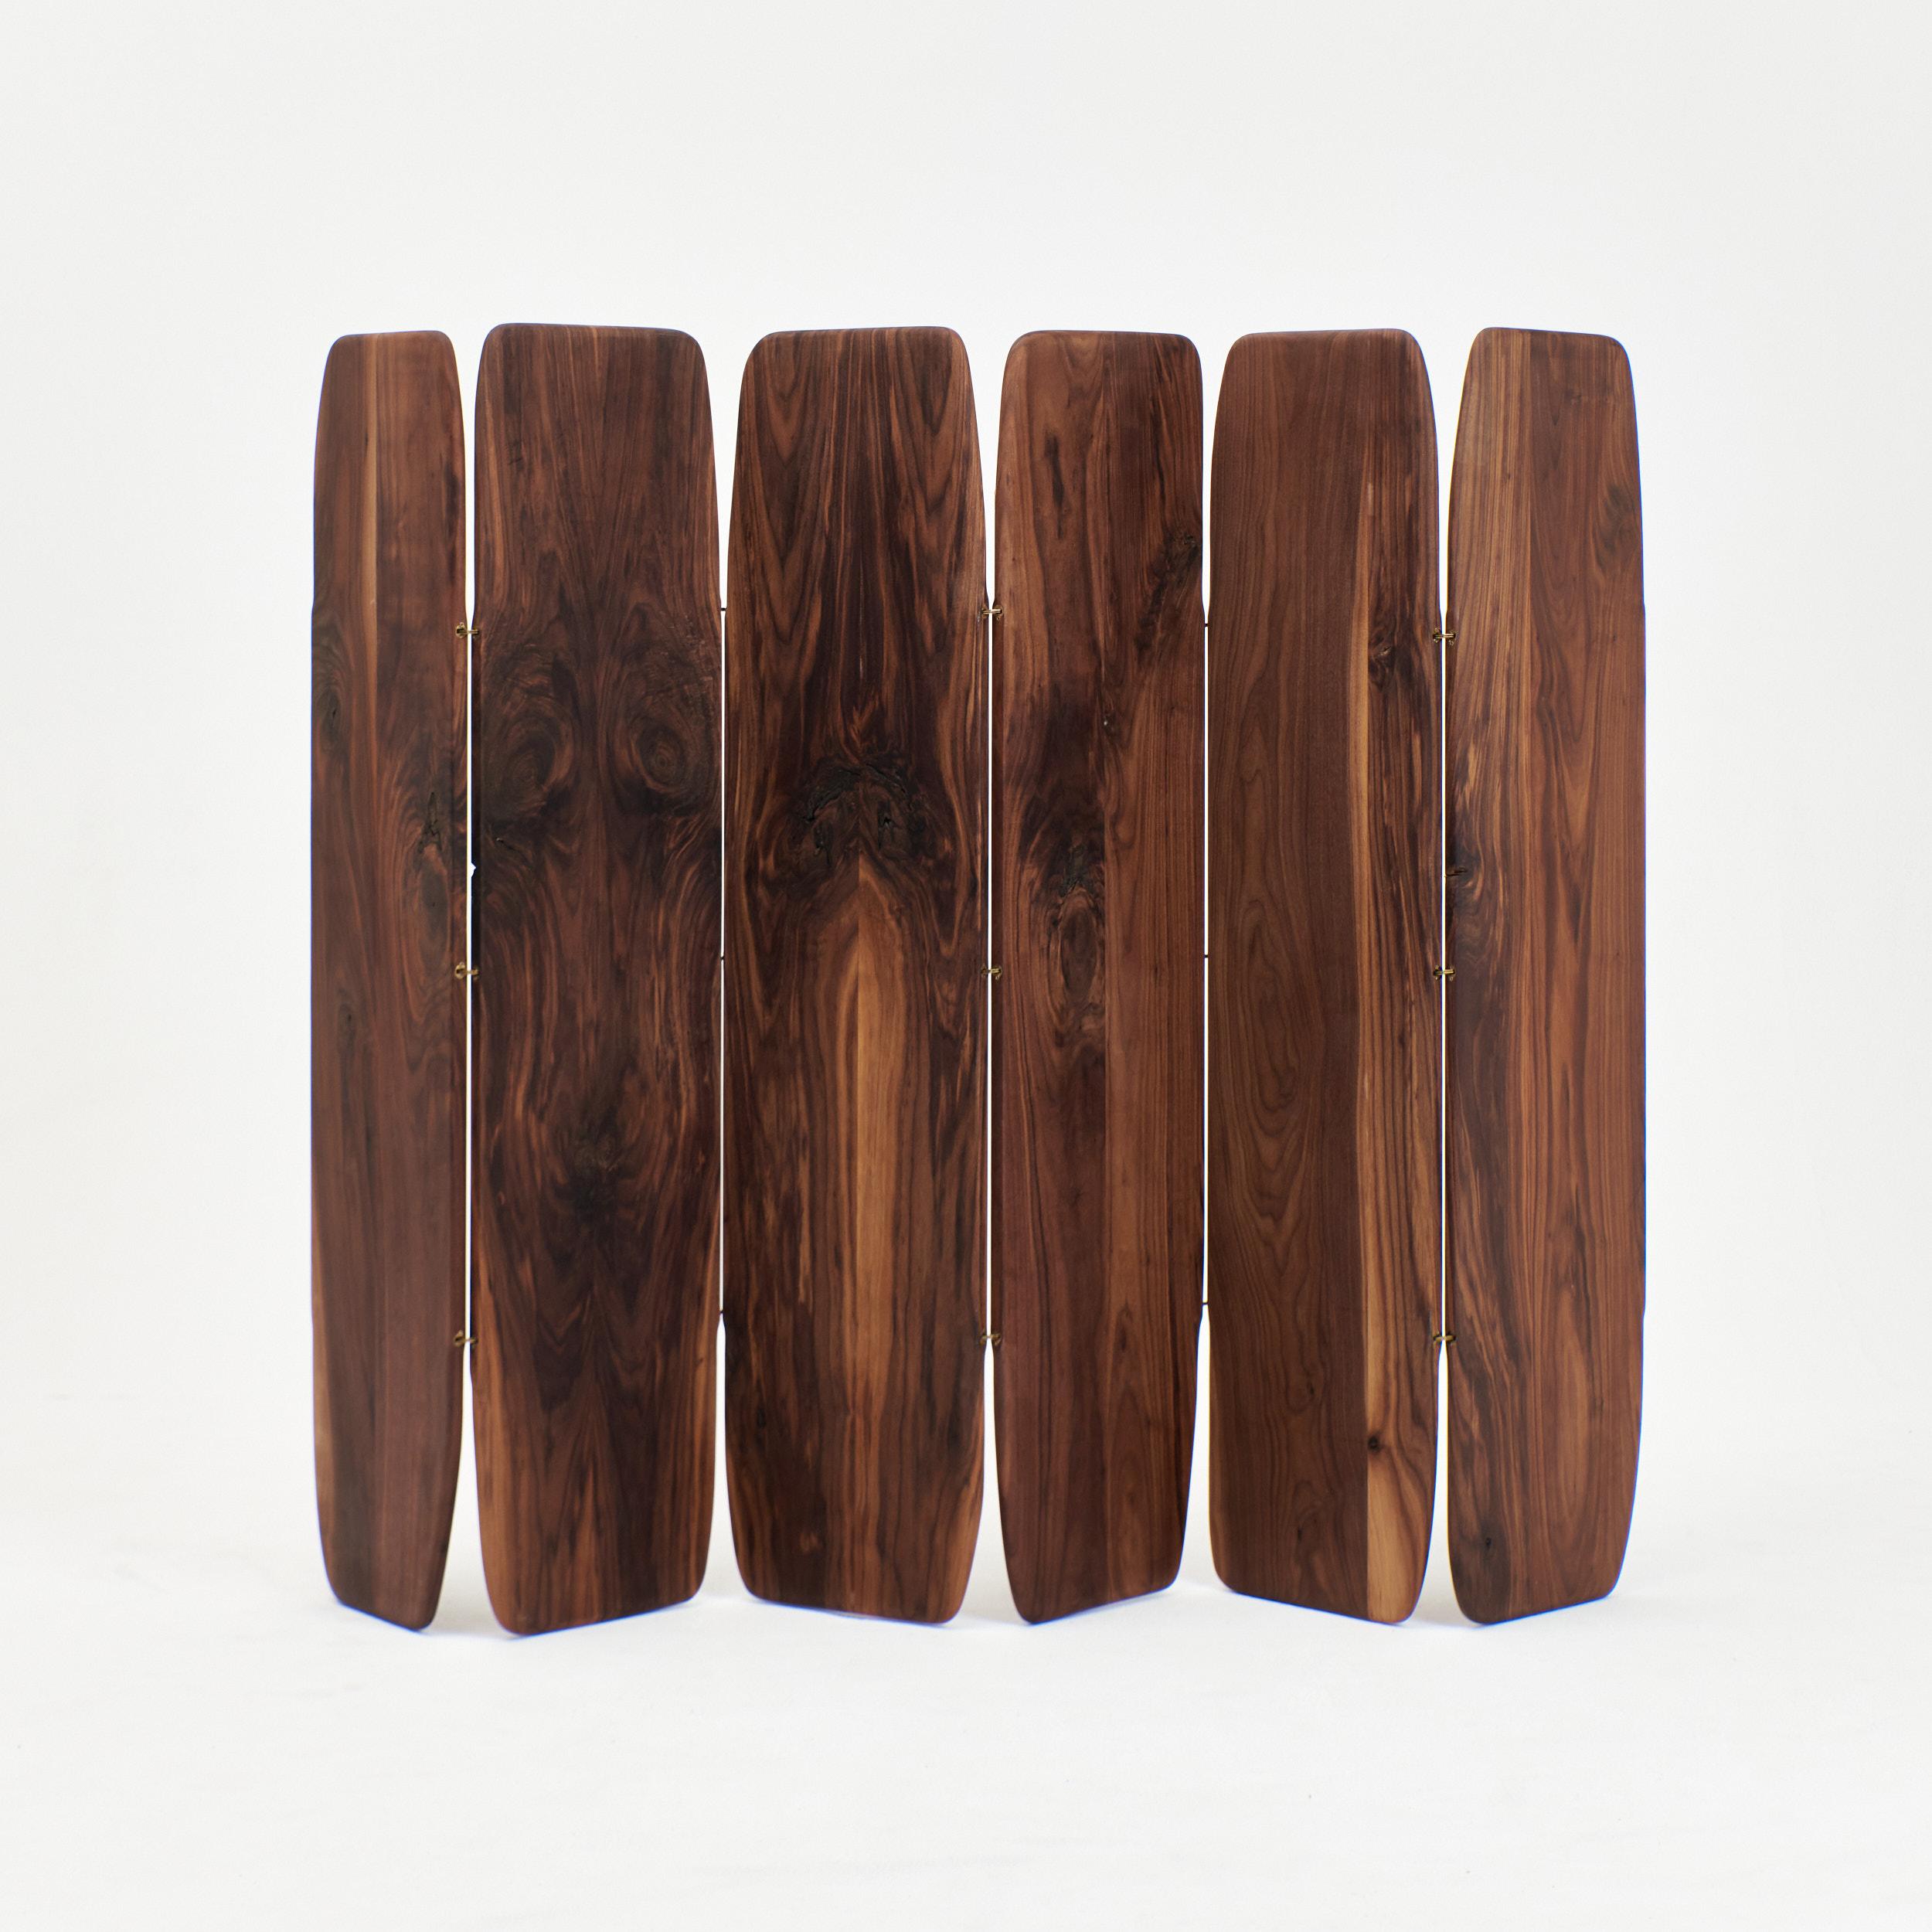 Walnut Madeira Room Divider (small) For Sale